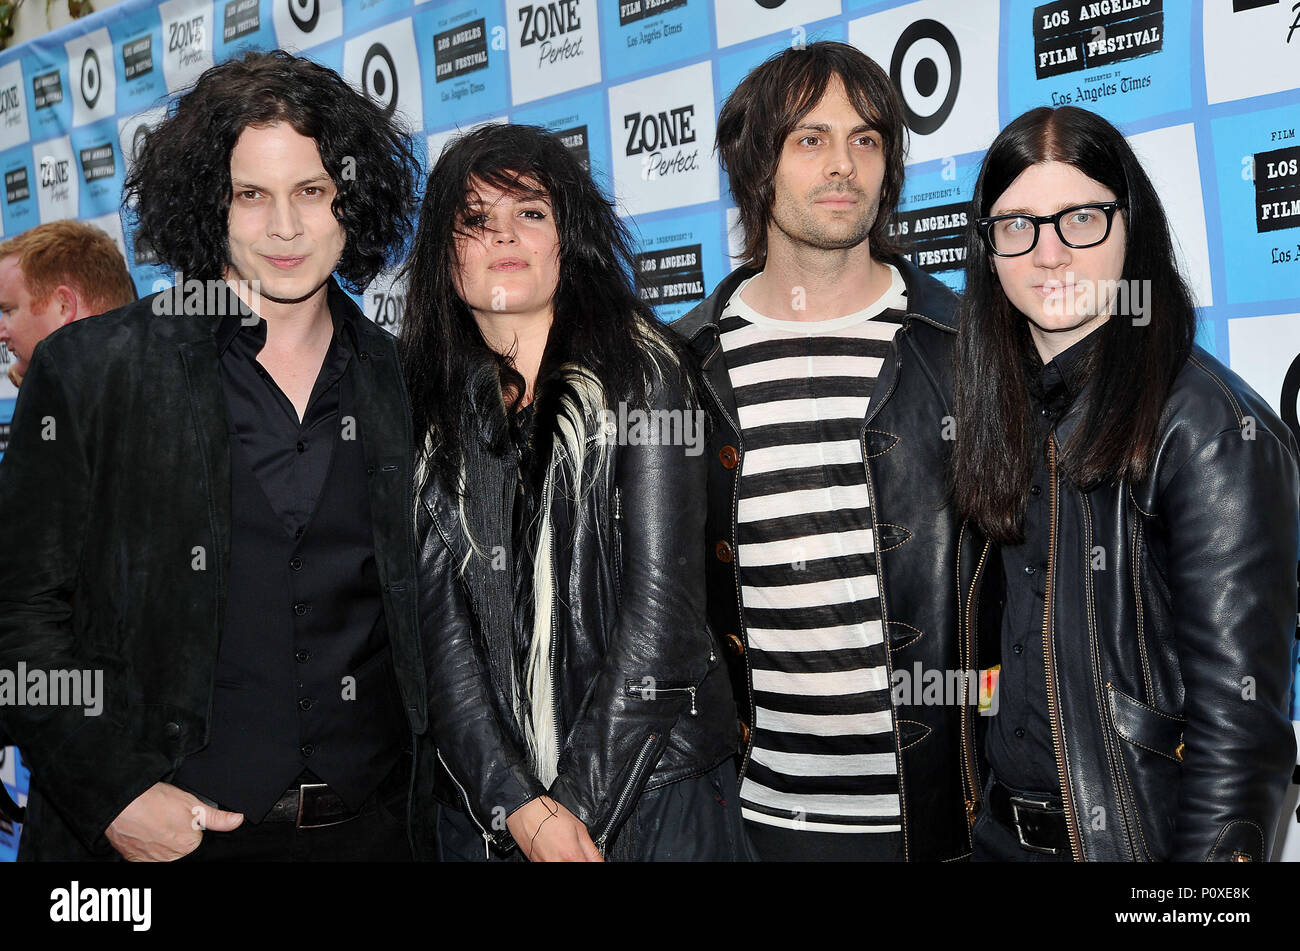 Jack White, Alison Mosshart ( of The Kills ), Dean Fertita ( of the Queens of Stone Age ), Jack lawrence ( of the Raconteurs )- It May Get loud Premiere at the LA Film Festival at the Man Festival Theatre In Los Angeles.          -            04 TheDeadWeather 04.jpg04 TheDeadWeather 04  Event in Hollywood Life - California, Red Carpet Event, USA, Film Industry, Celebrities, Photography, Bestof, Arts Culture and Entertainment, Topix Celebrities fashion, Best of, Hollywood Life, Event in Hollywood Life - California, Red Carpet and backstage, ,Arts Culture and Entertainment, Photography,    inqu Stock Photo